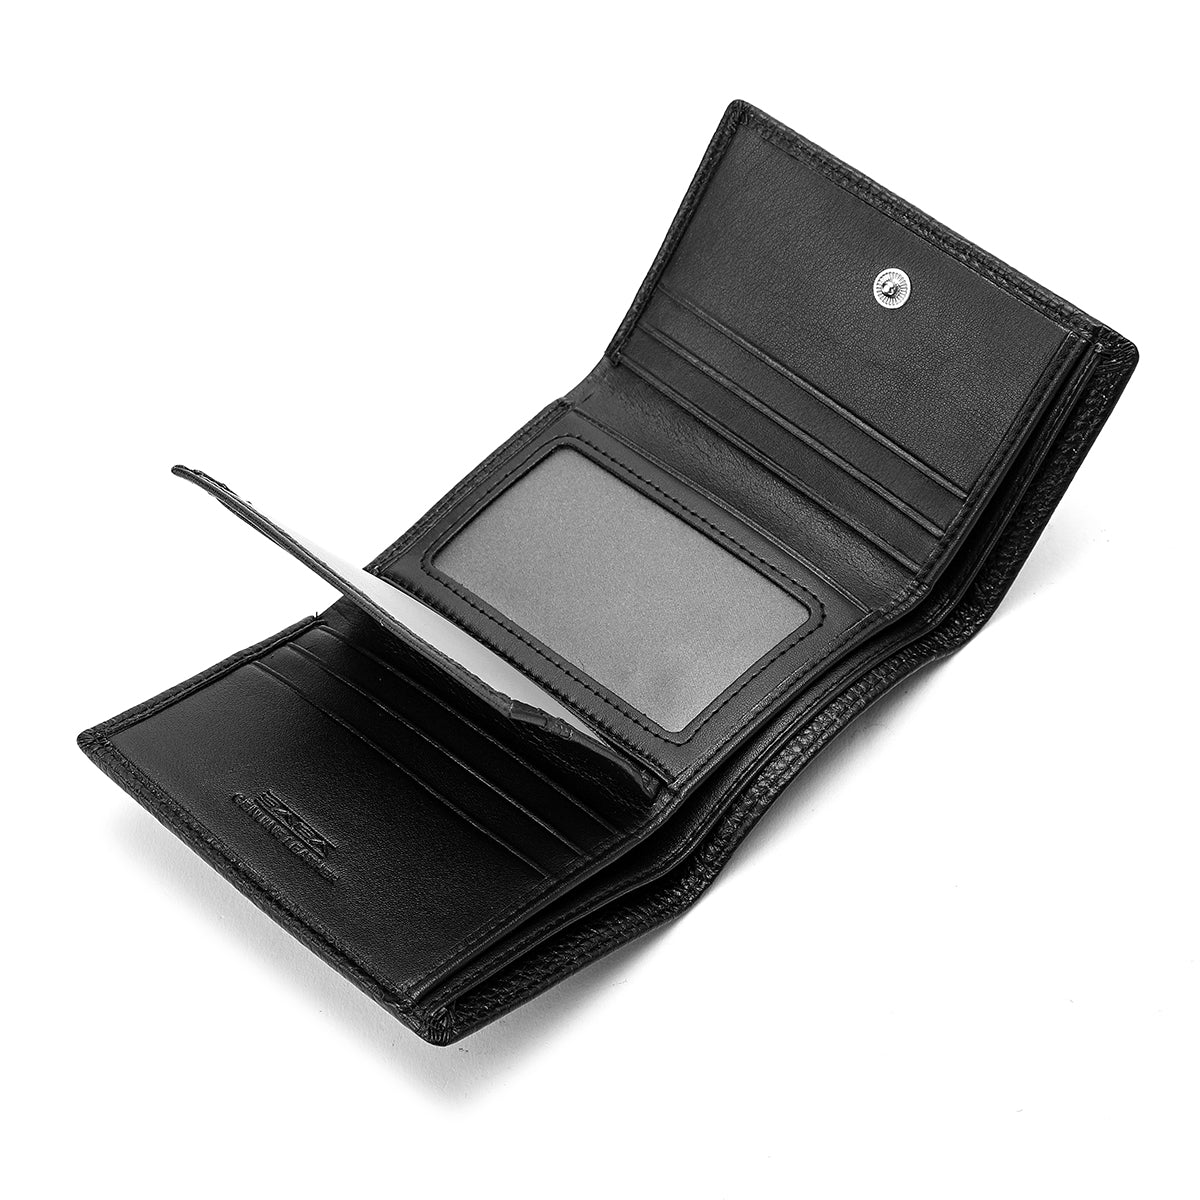 Practical genuine leather men's wallet available in two colors